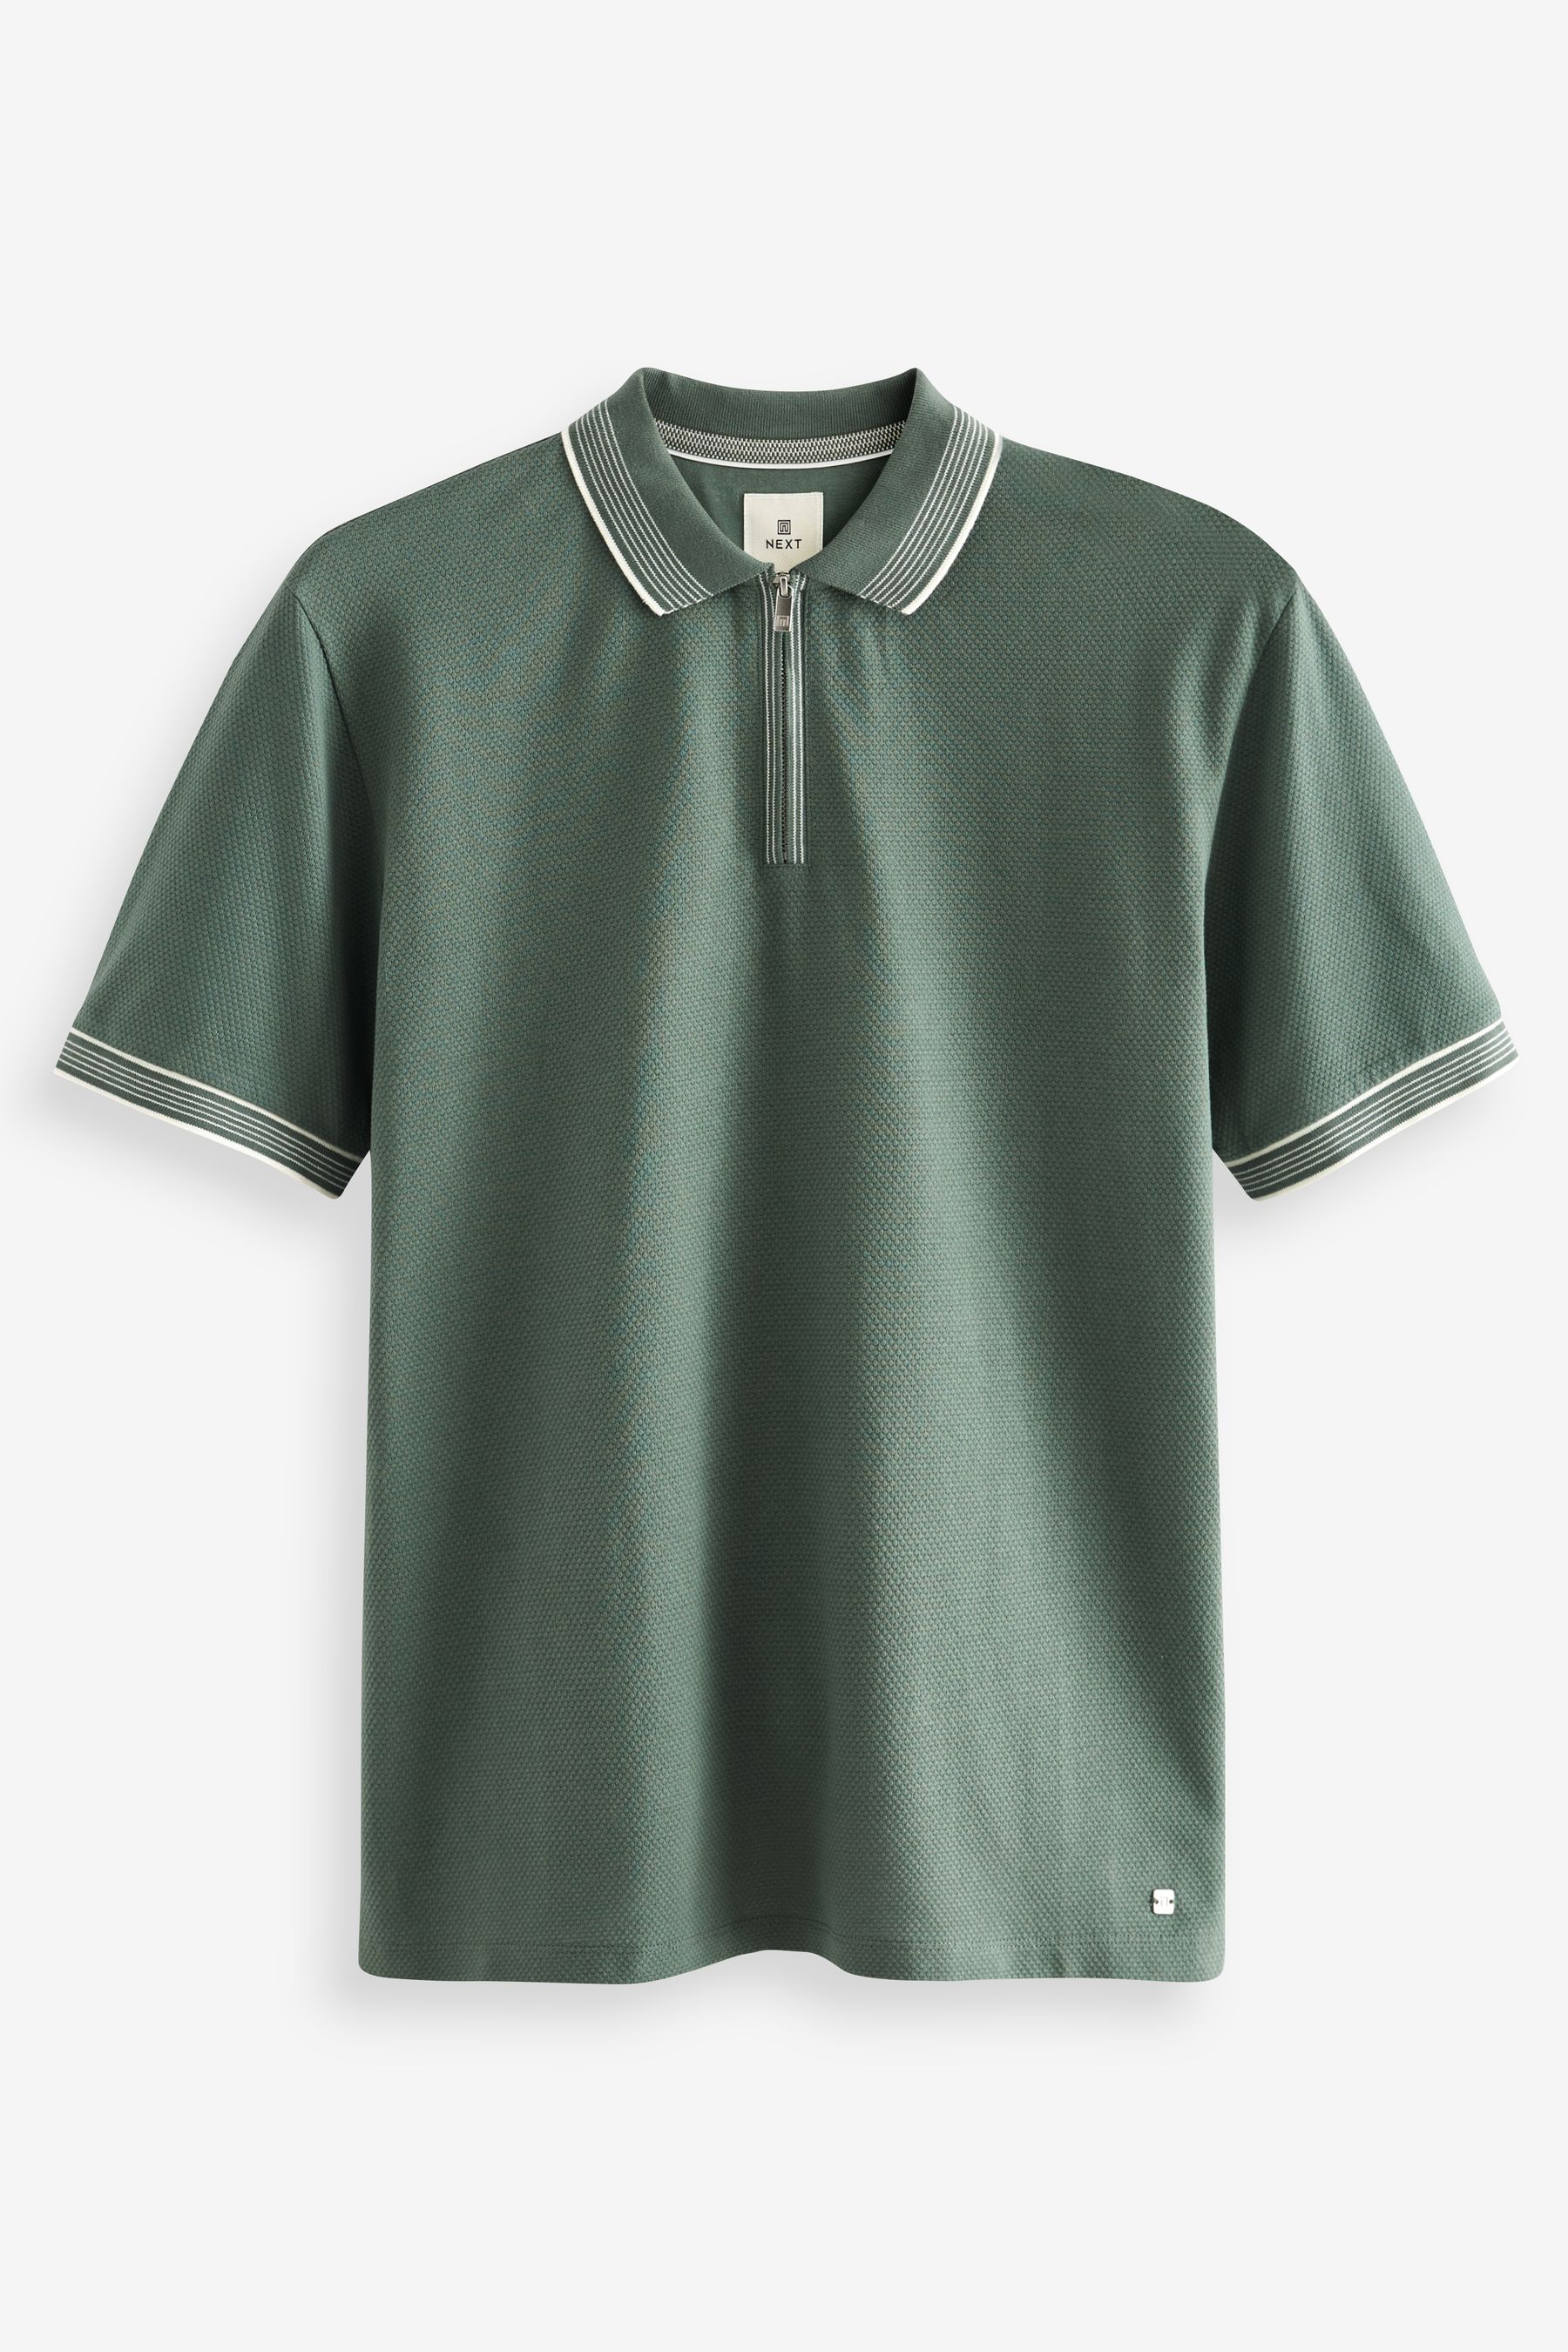 Buy Sage Green Tipped Textured Polo Shirt from the Next UK online shop